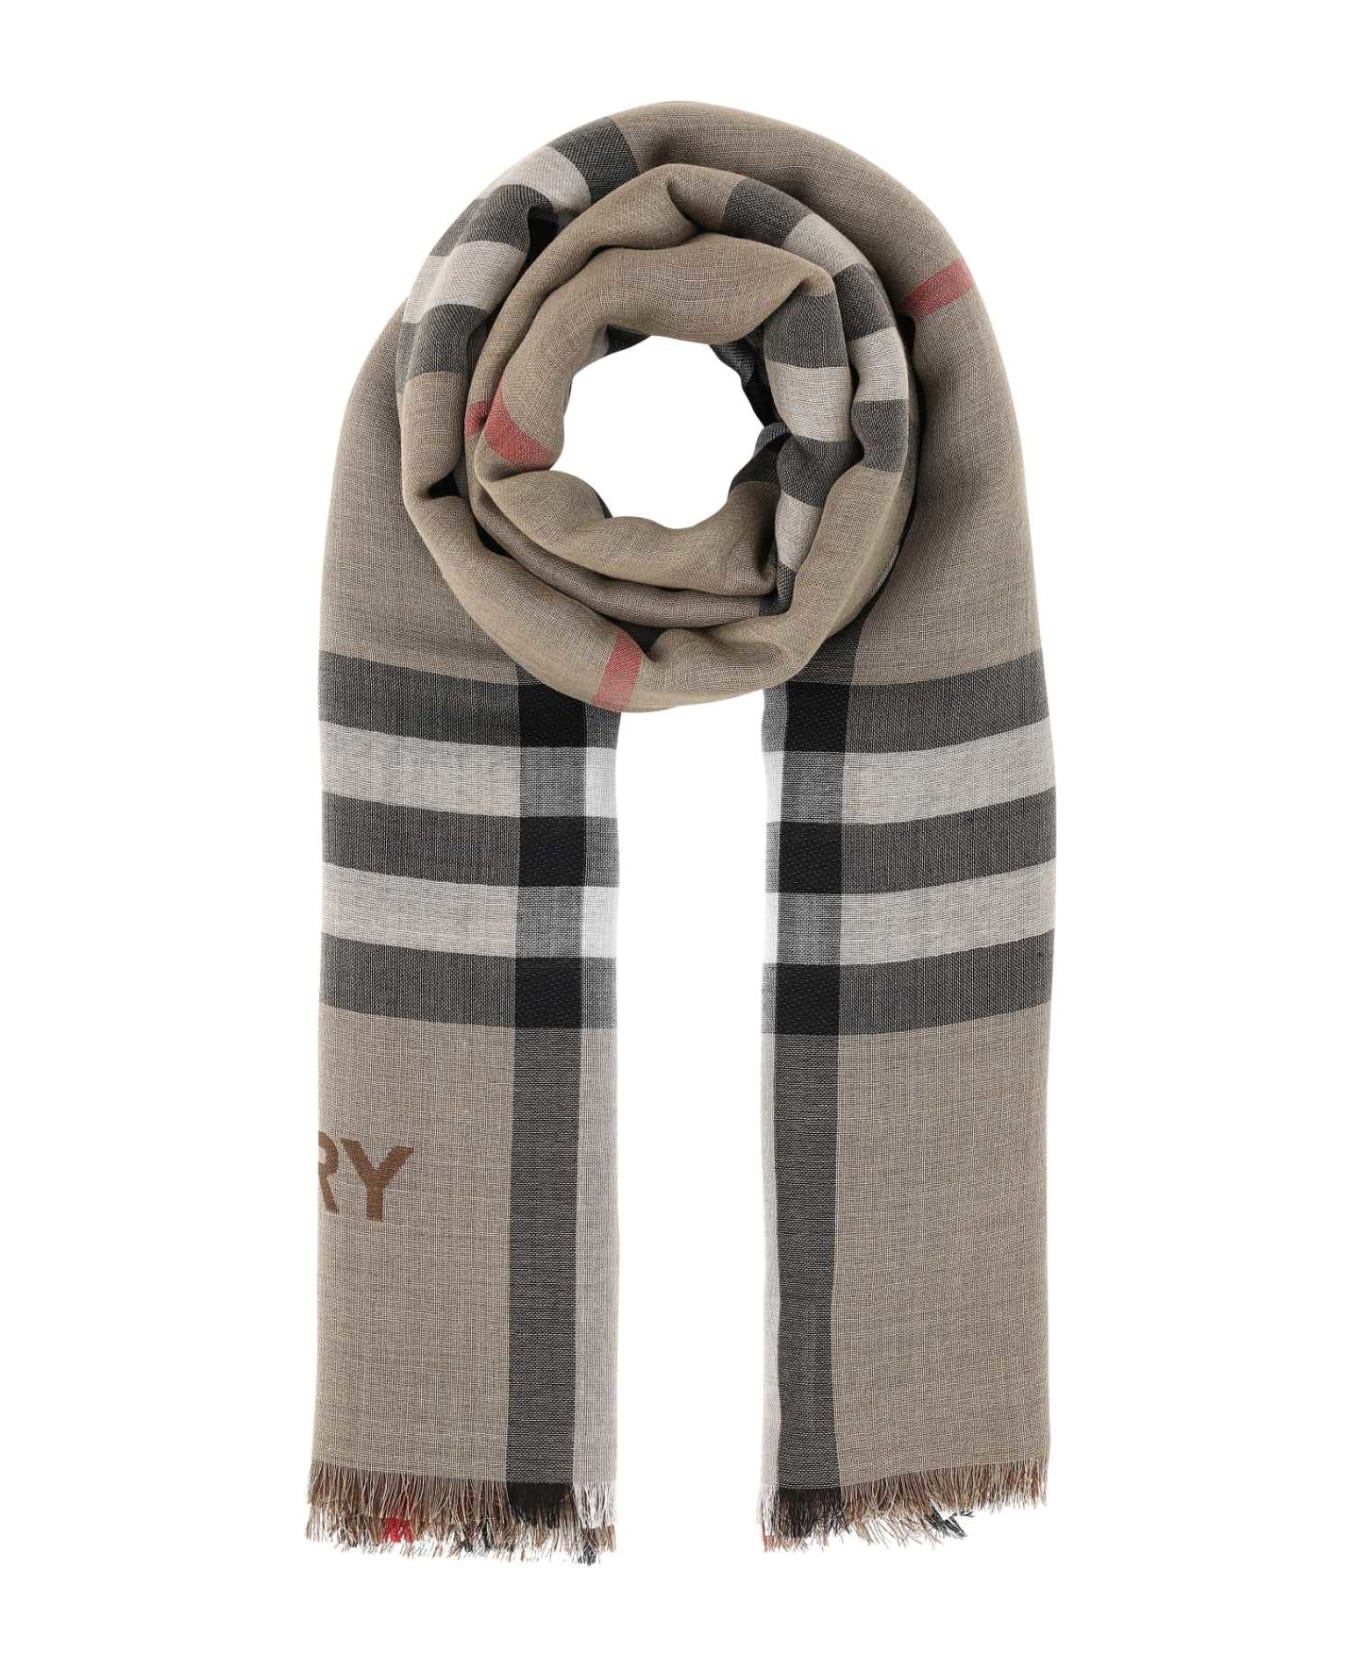 Burberry Embroidered Wool Blend Scarf - ARCHIVEBEIGE